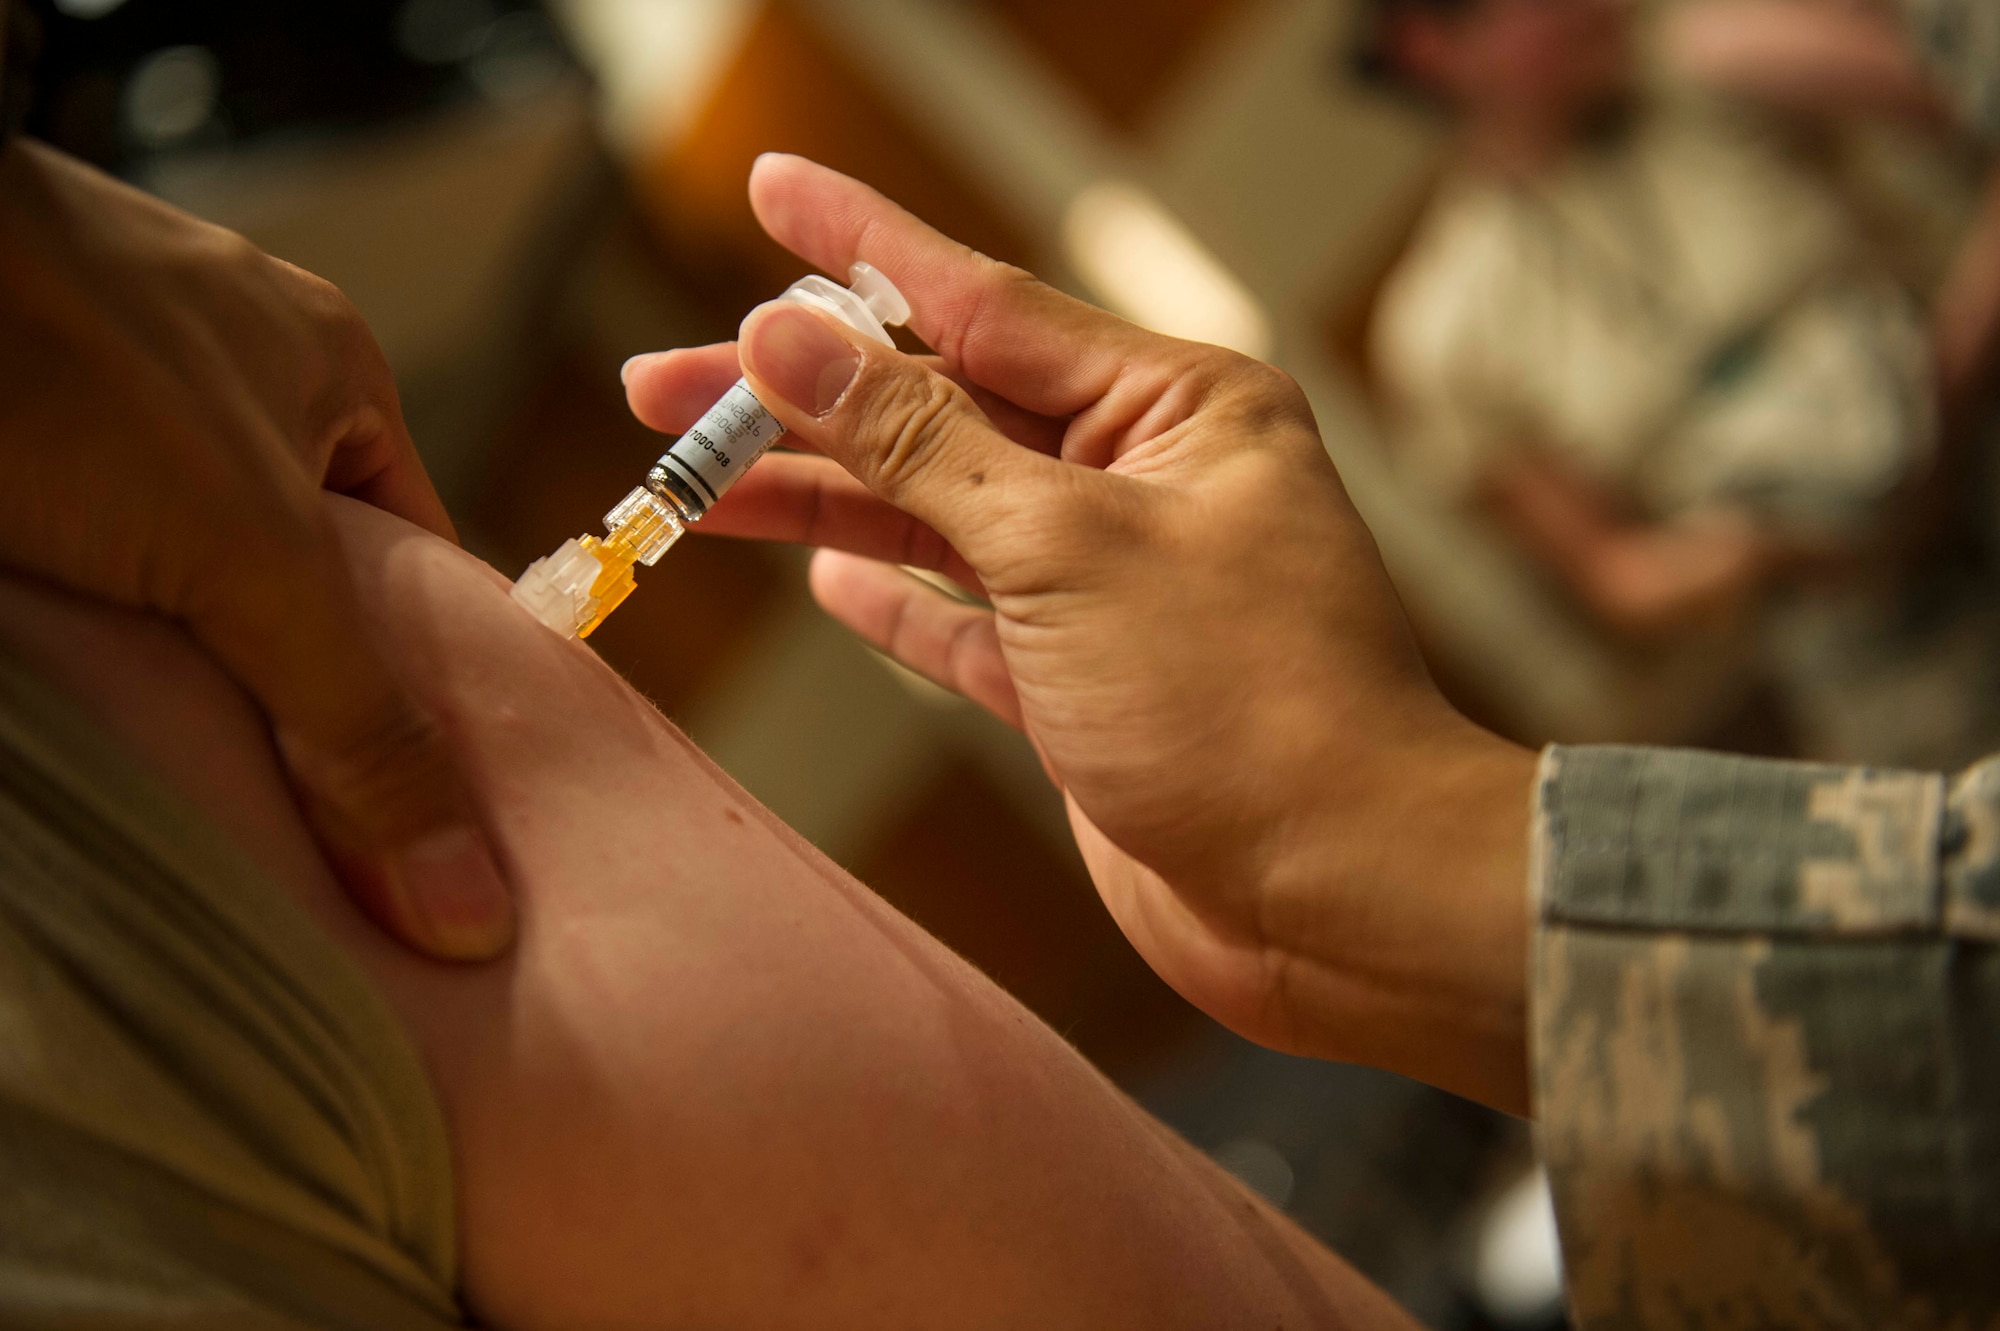 Medical technicians from the 88th Medical Group administer annual influenza vaccinations at the National Air and Space Intelligence Center Oct. 6, 2015. It is mandatory for all military and health care personnel to receive the vaccine annually, and highly recommended for everyone more than 6 months old. (U.S. Air Force photo by Senior Airman Justyn Freeman)